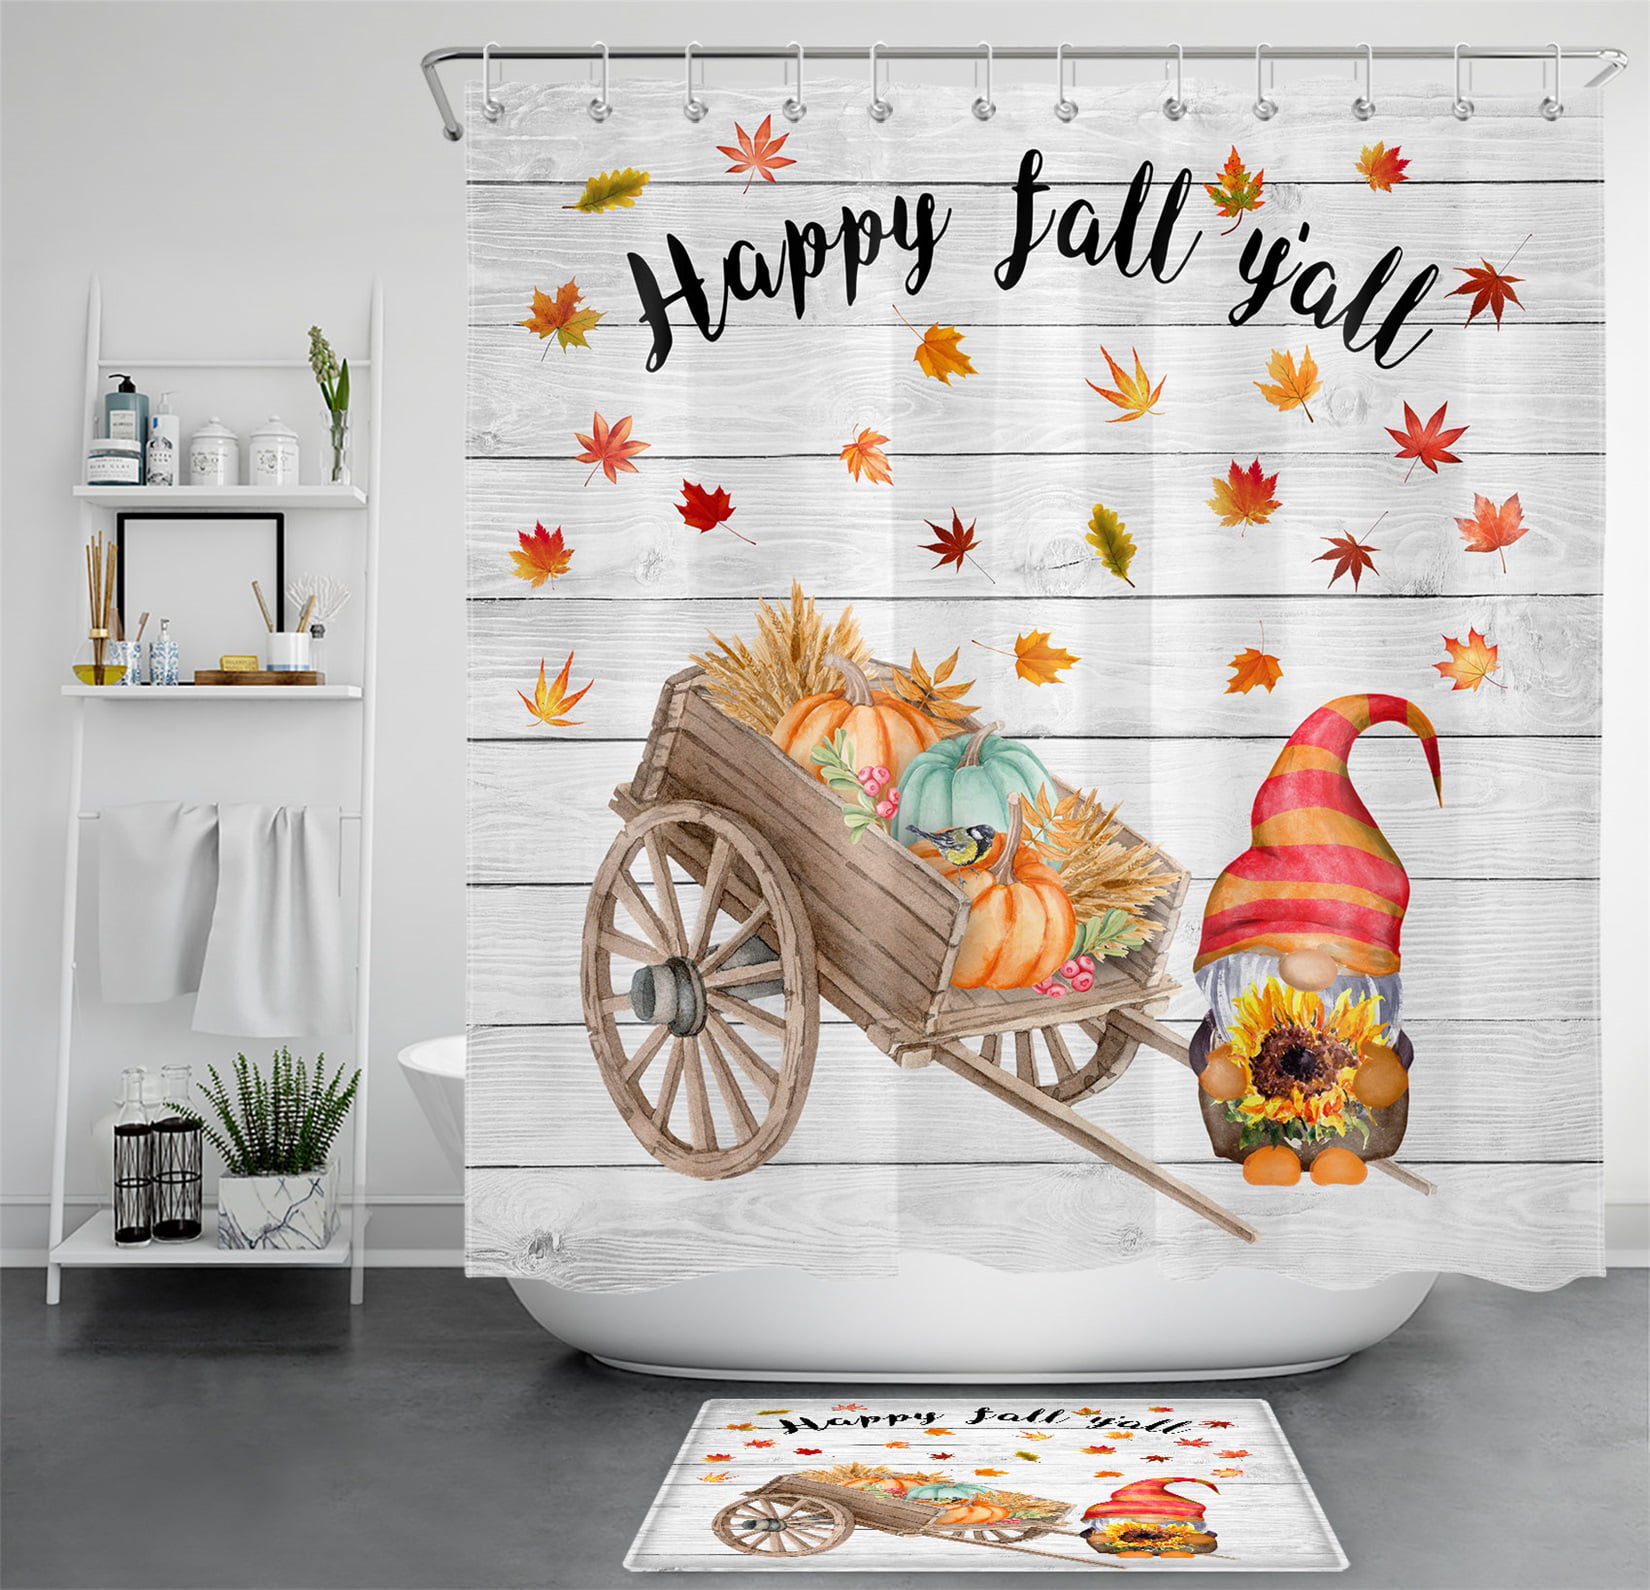 lovedomi Hello Fall Shower Curtain Vintage Blue Truck Pumpkin Sunflower Autumn Maple Leaves Rustic Wood Plank Thanksgiving Harvest Shower Curtains for Bathroom Set Decor with Hooks 60X72 Inch Fabric 